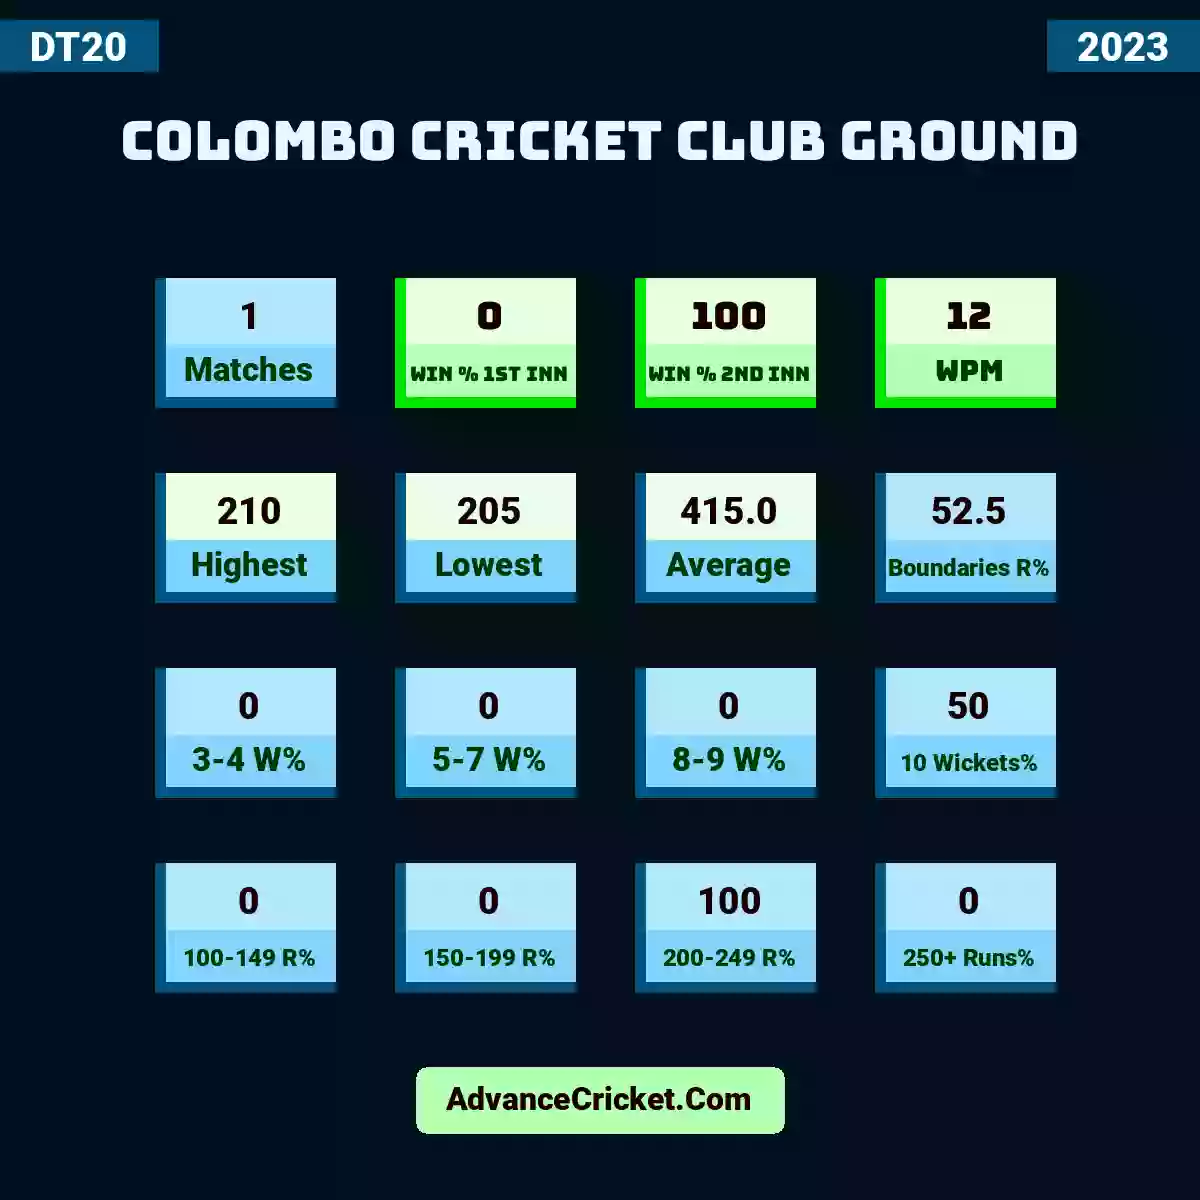 Image showing Colombo Cricket Club Ground with Matches: 1, Win % 1st Inn: 0, Win % 2nd Inn: 100, WPM: 12, Highest: 210, Lowest: 205, Average: 415.0, Boundaries R%: 52.5, 3-4 W%: 0, 5-7 W%: 0, 8-9 W%: 0, 10 Wickets%: 50, 100-149 R%: 0, 150-199 R%: 0, 200-249 R%: 100, 250+ Runs%: 0.